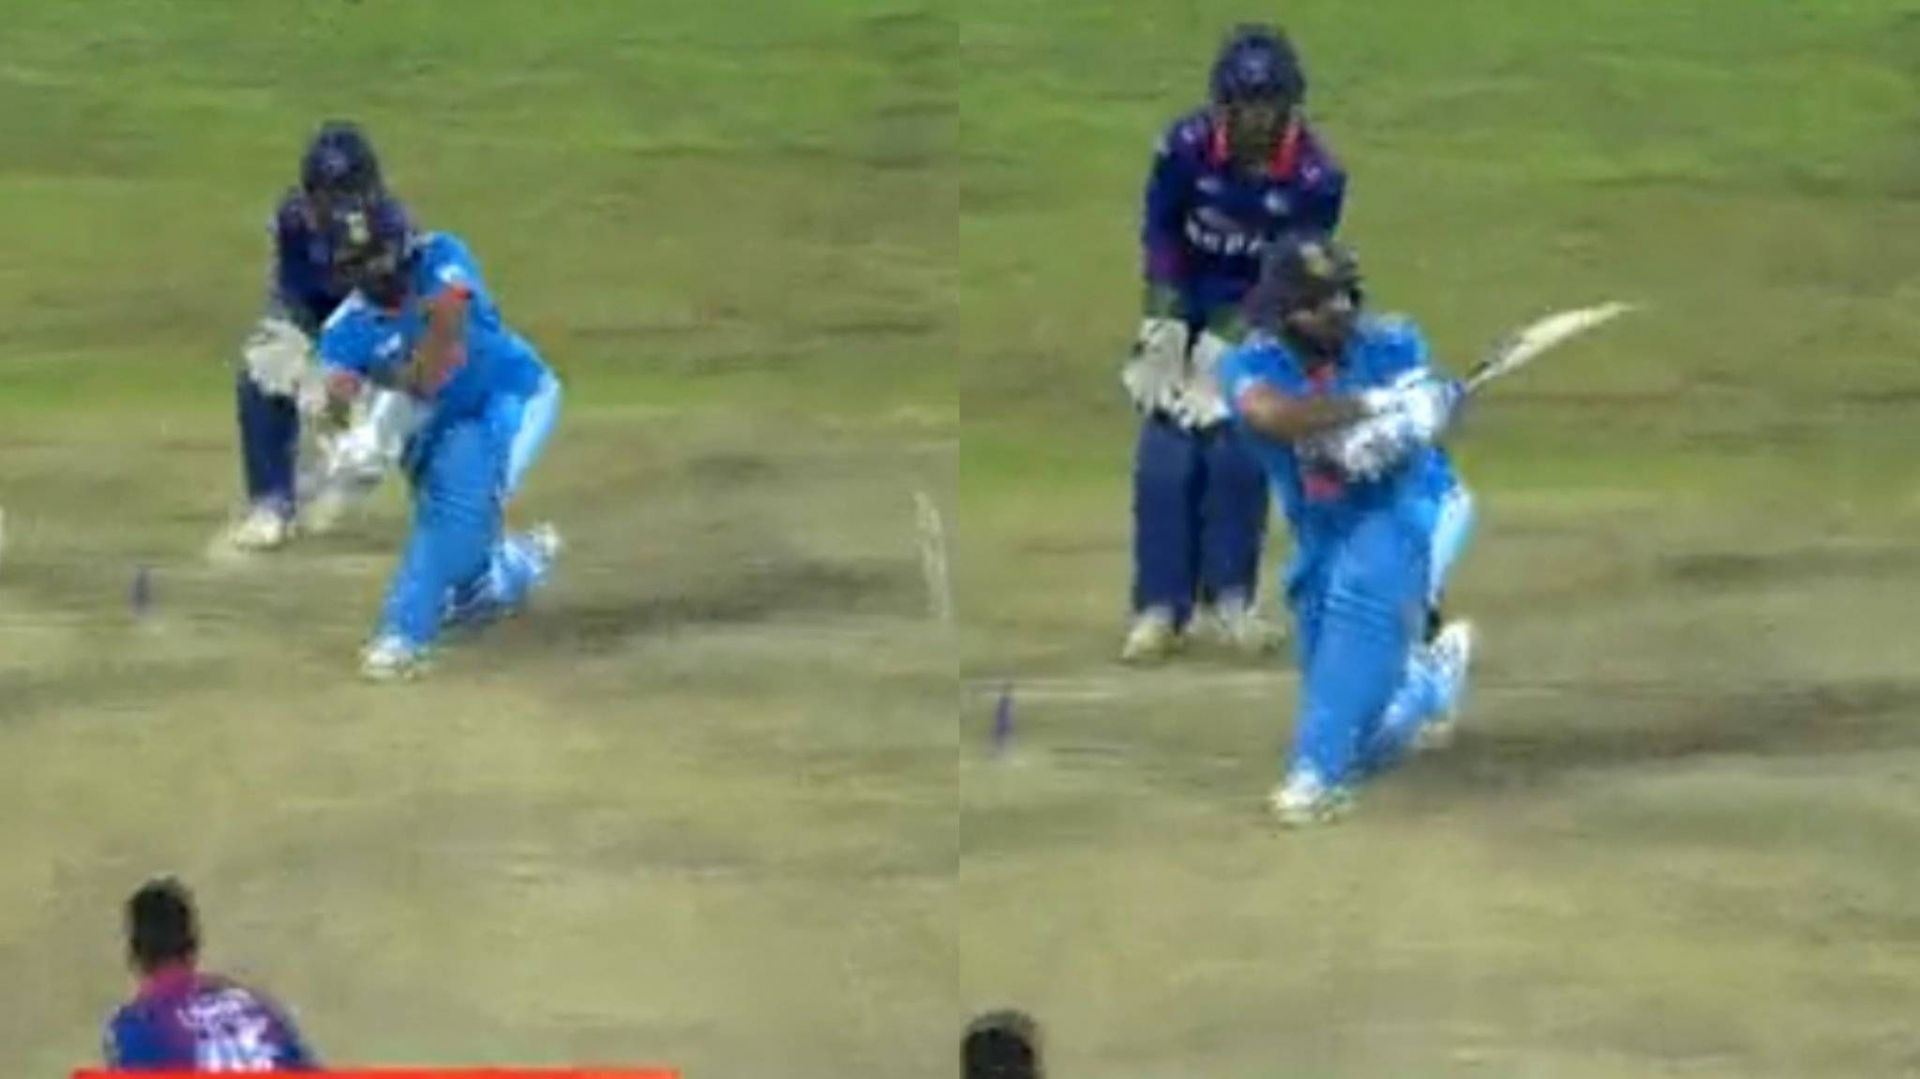 Rohit Sharma played an outrageous shot during yesterday